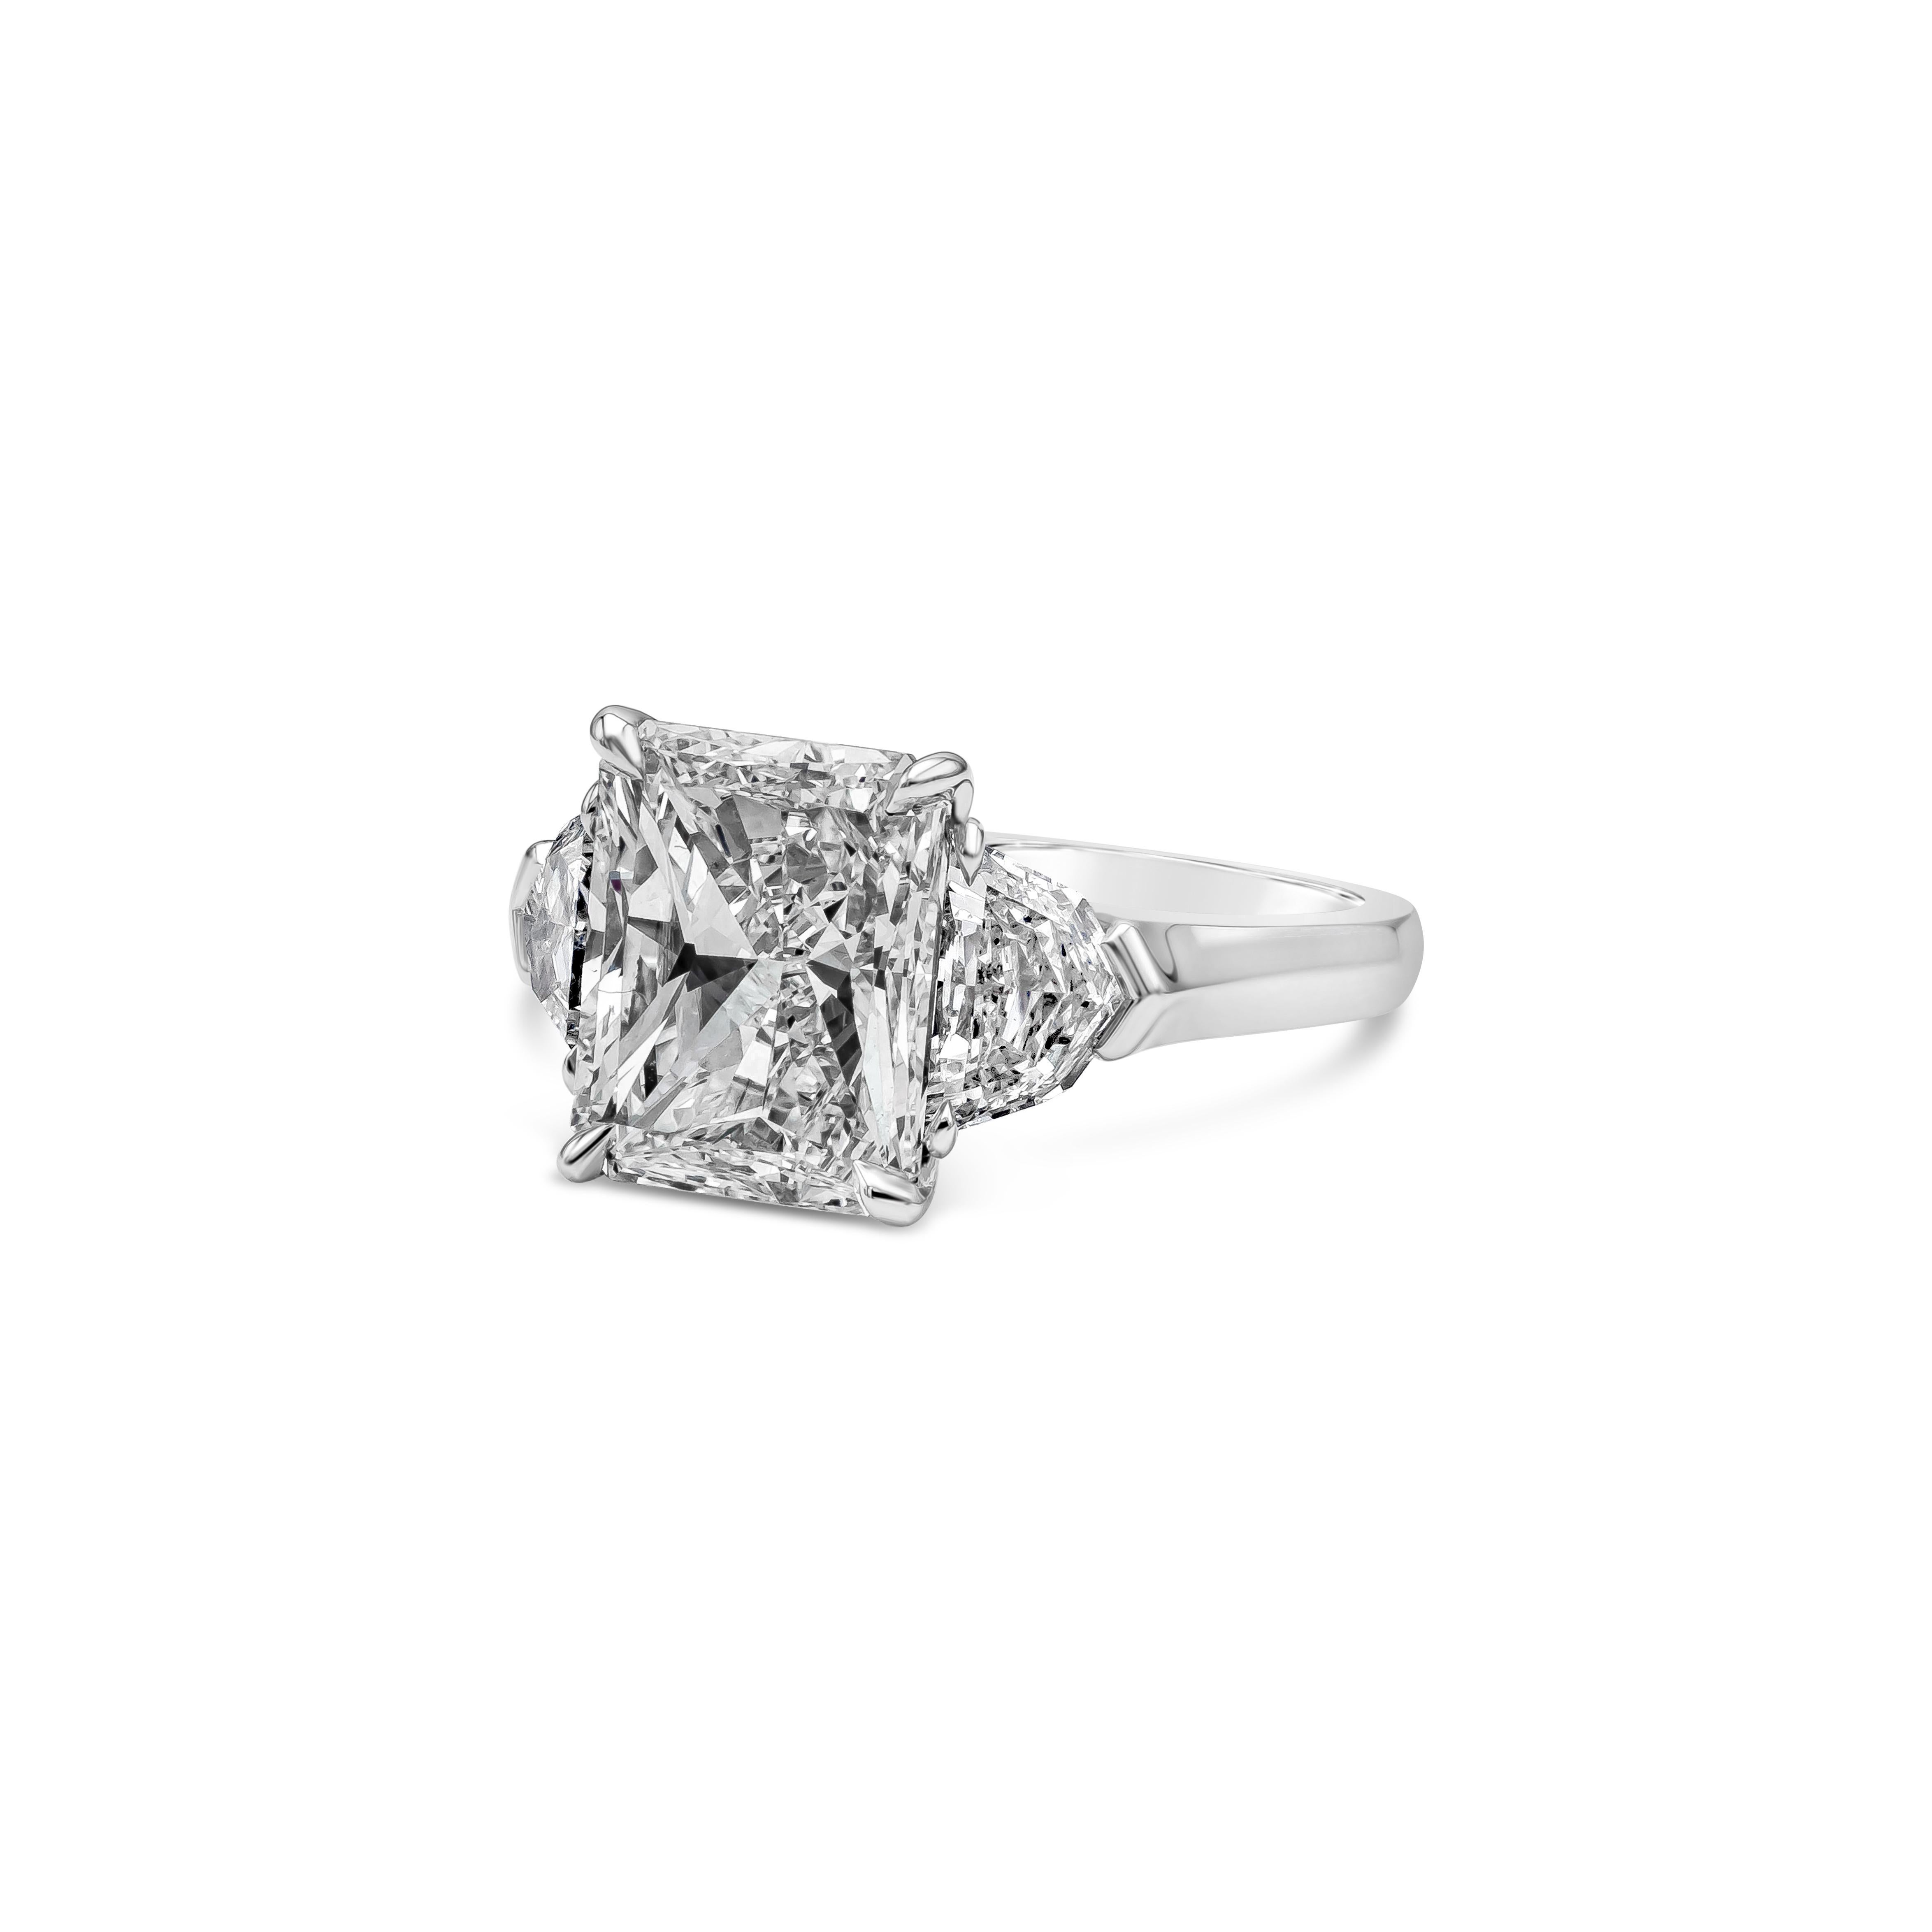 This elegant three stone engagement ring features a GIA Certified 4.53 carat radiant cut diamond center stone, J Color and VS2 in Clarity. Flanking the center stone are 2 epaulette diamonds, weighing 1.45 carats total, J Color and VS in Clarity.